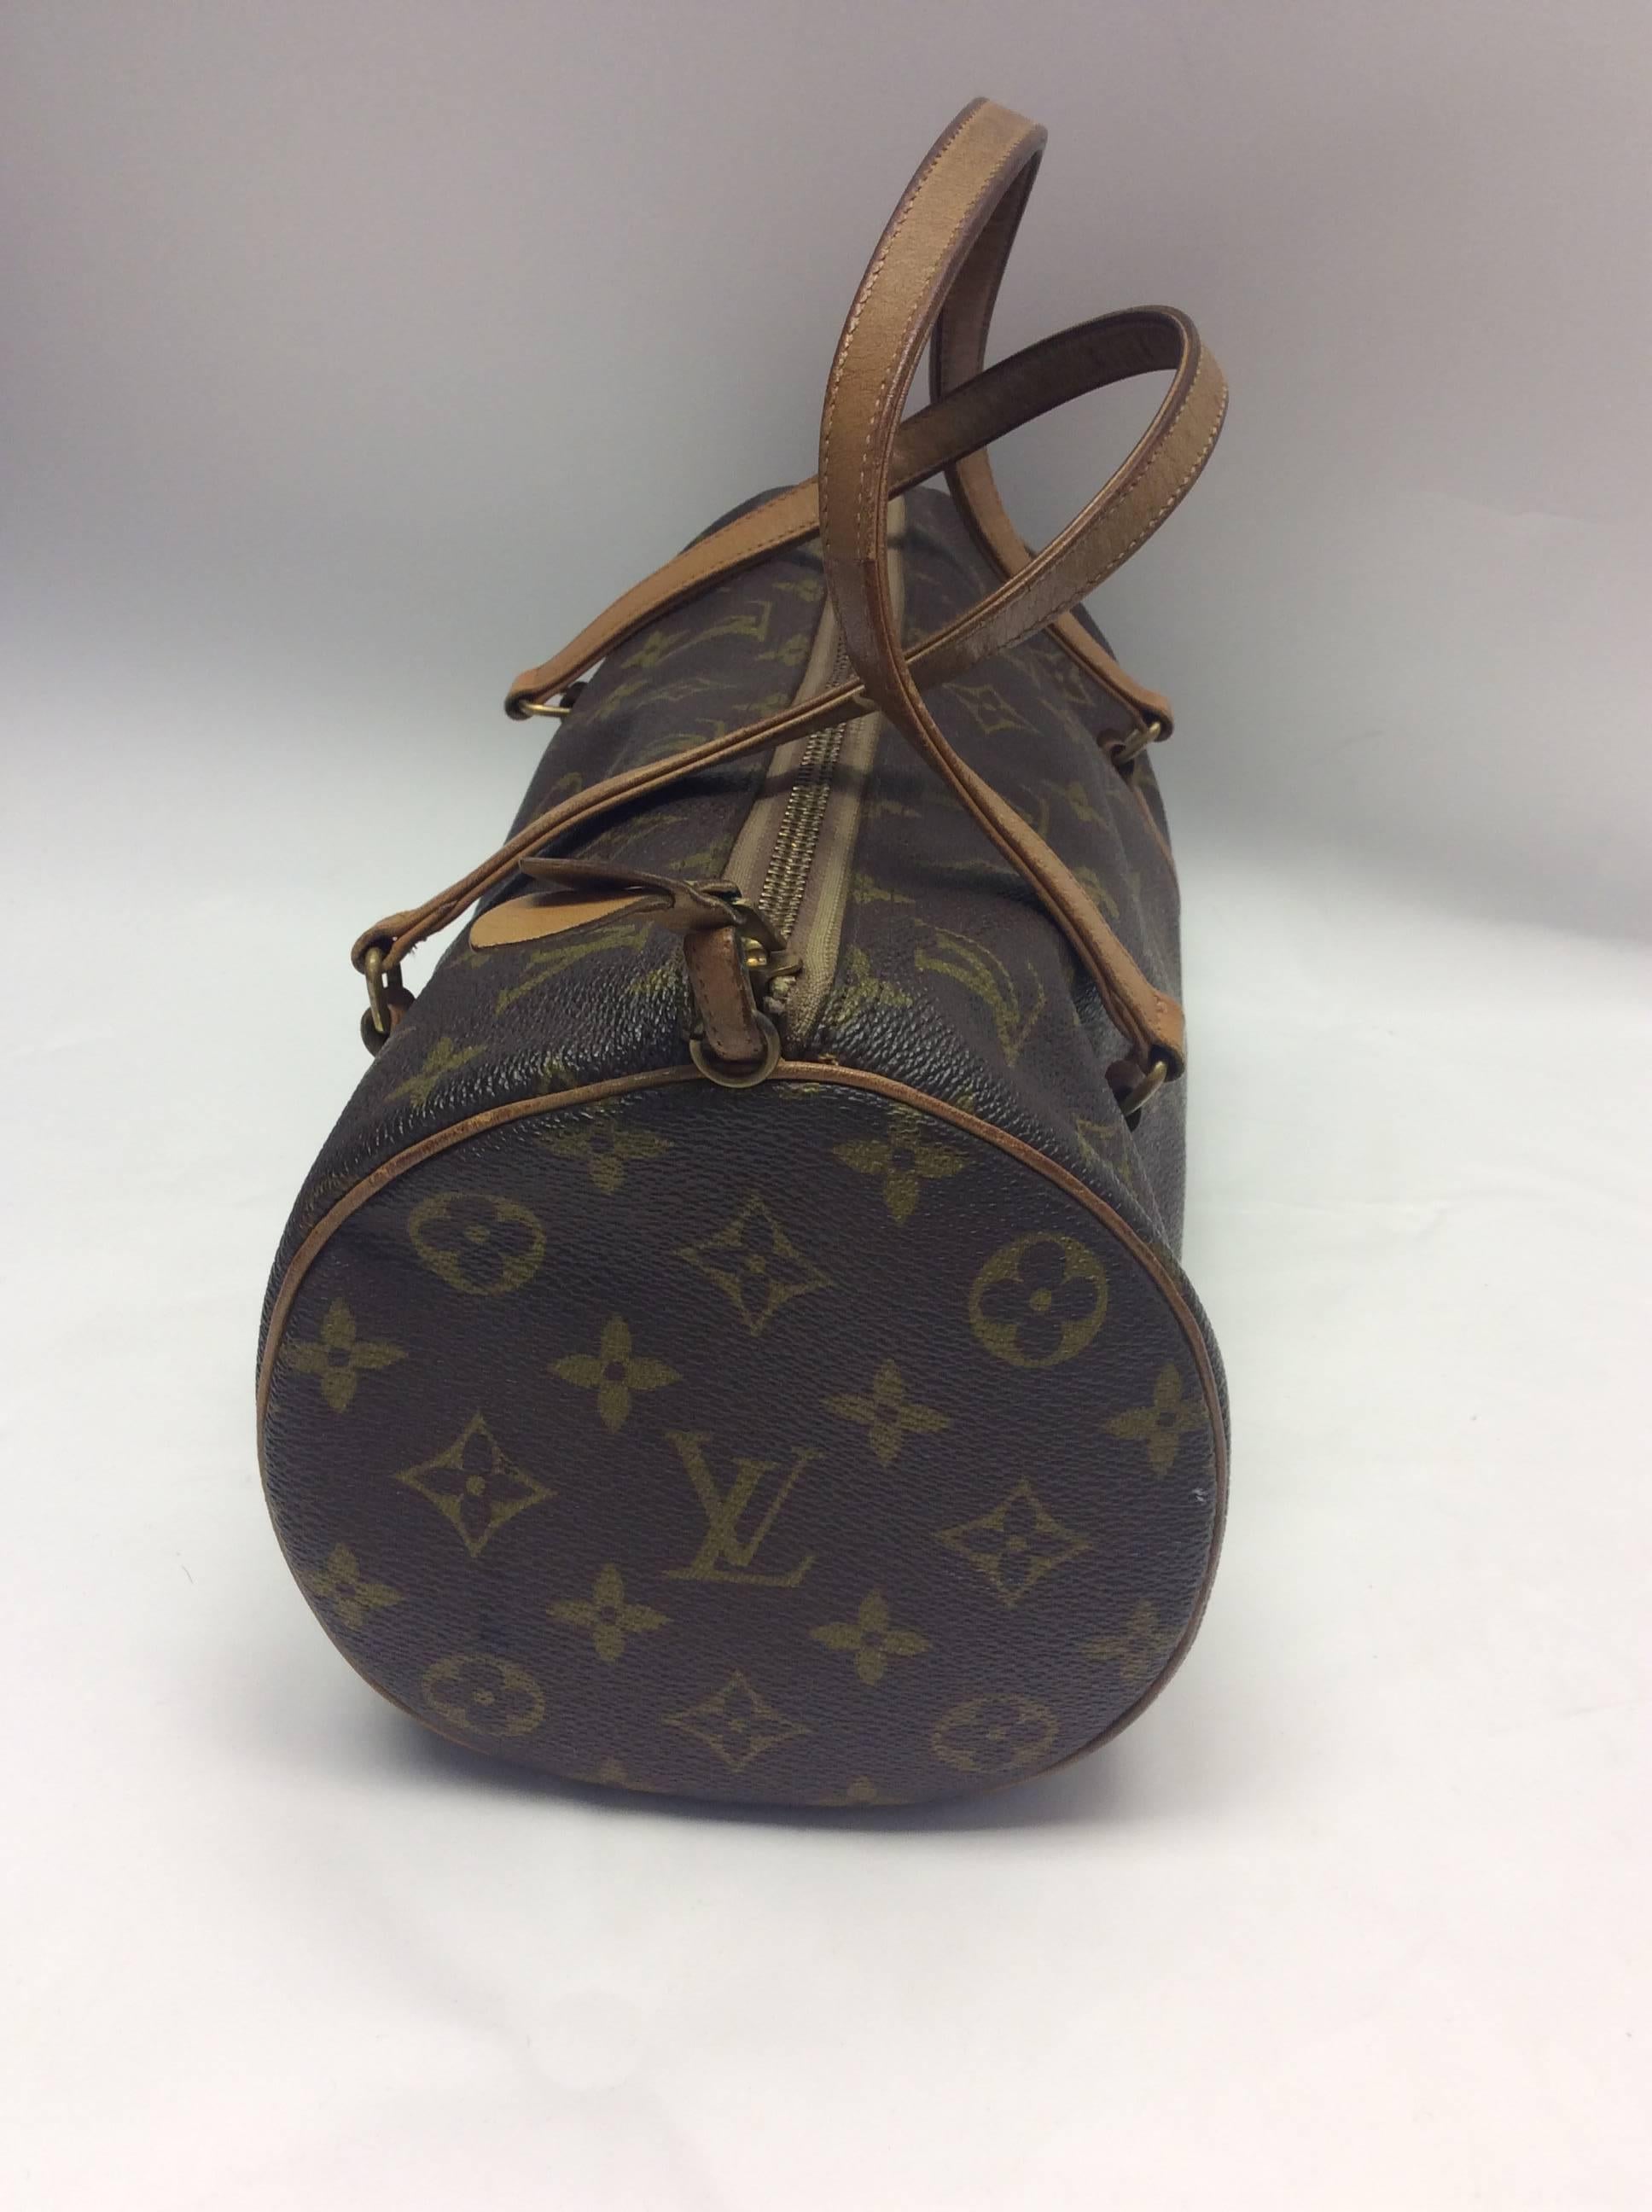 Louis Vuitton Papillon Monogram Shoulder Bag
Top zipper closure, leather zipper pull
Made in France
Monogram print on canvas, leather 
Vintage patina, see photos 
$399